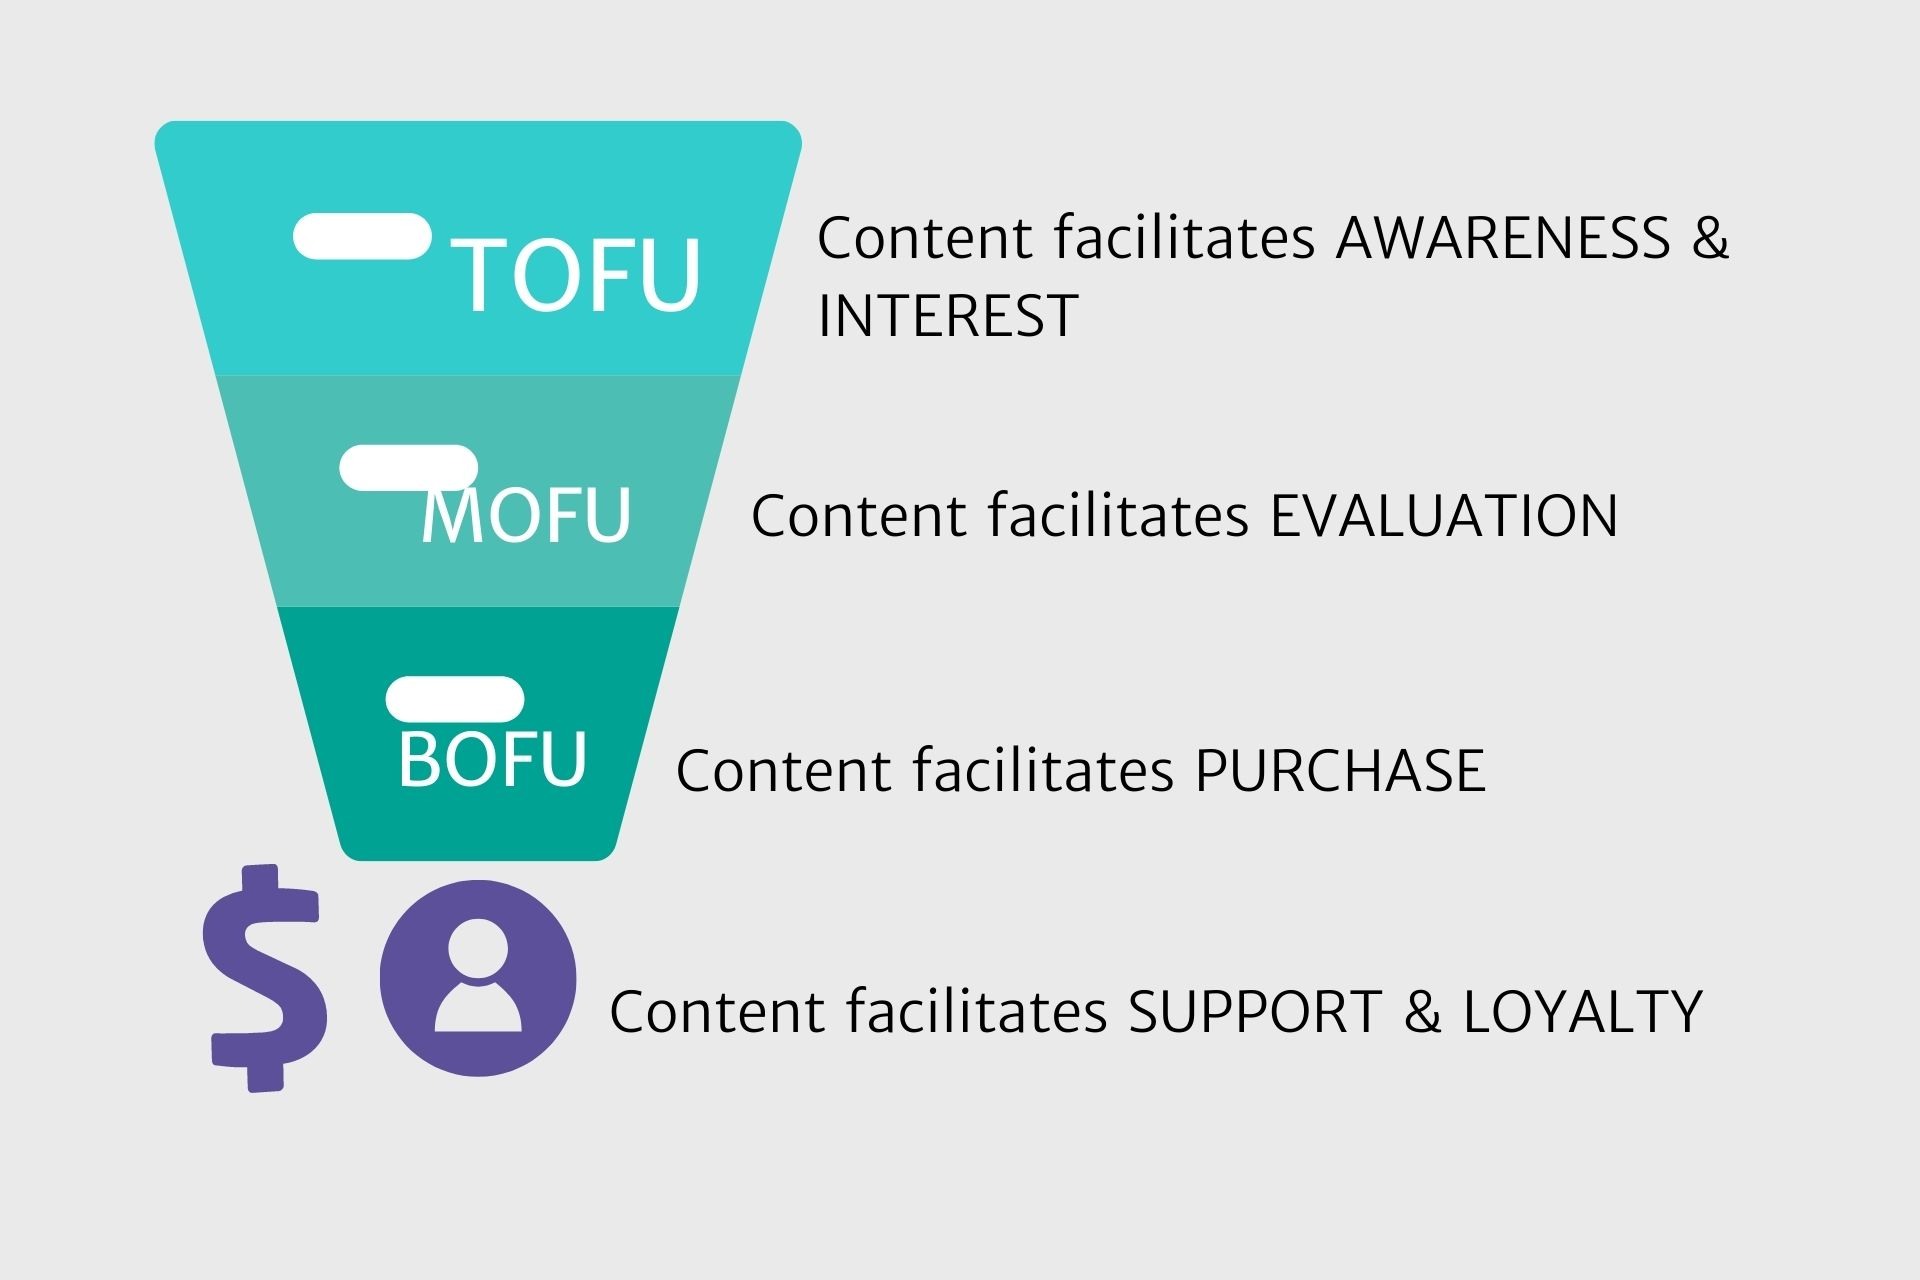 marketing funnel with tofu, mofu, and bofu and what each stage facilitates, interest, evaluation, purchase and loyalty